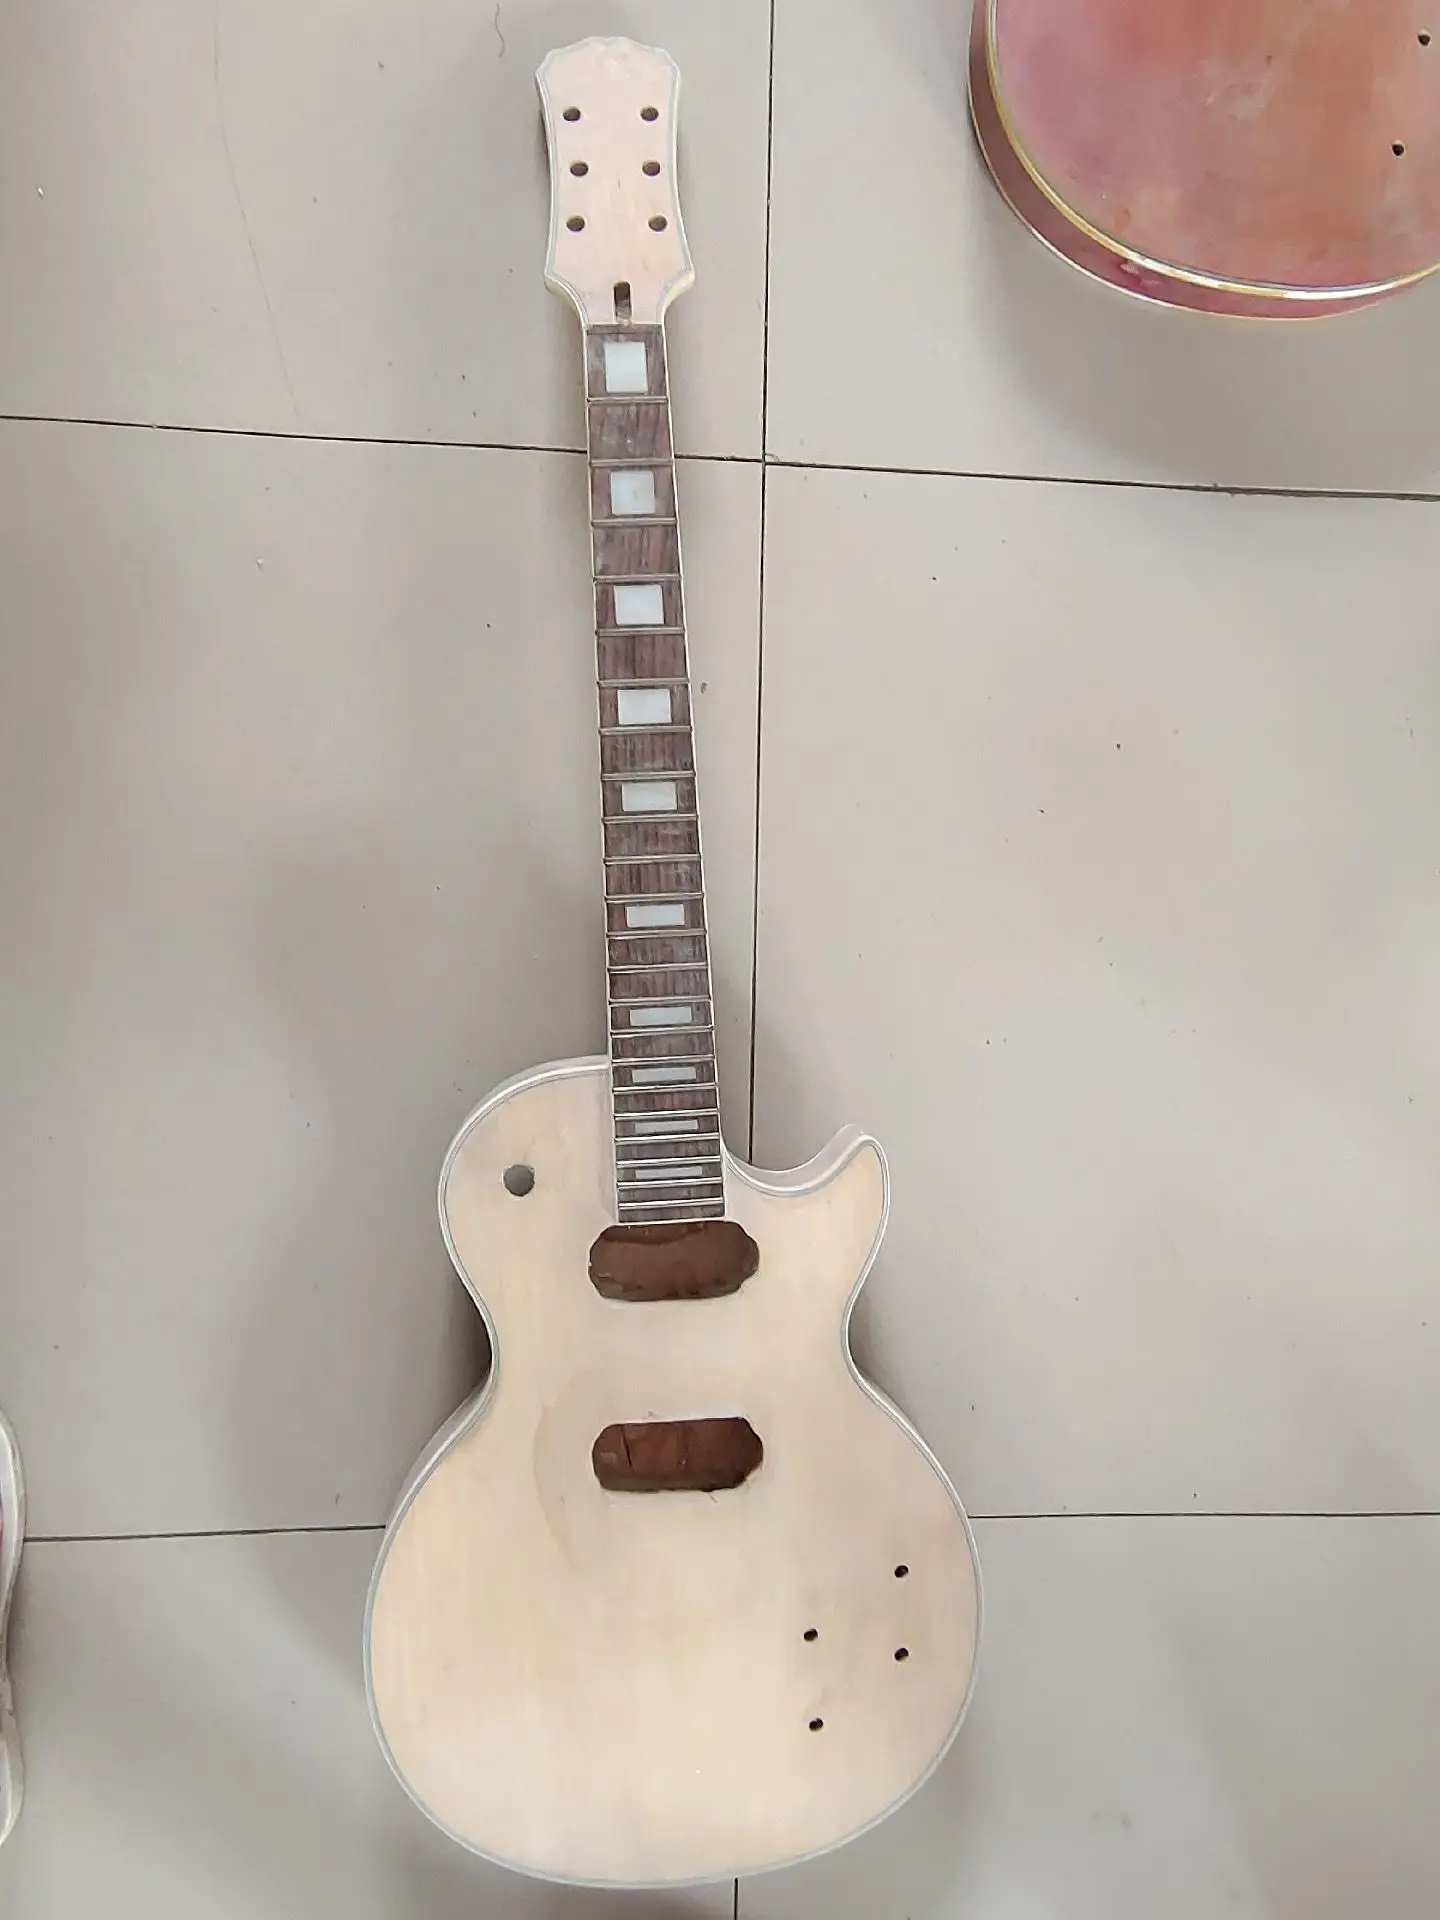 Unfinished LP Gibson Style ST Electric Guitar Kit Guitar Neck And Body Undyed DIY Parts Semi- finished Guitar Kit for Luthier enlarge